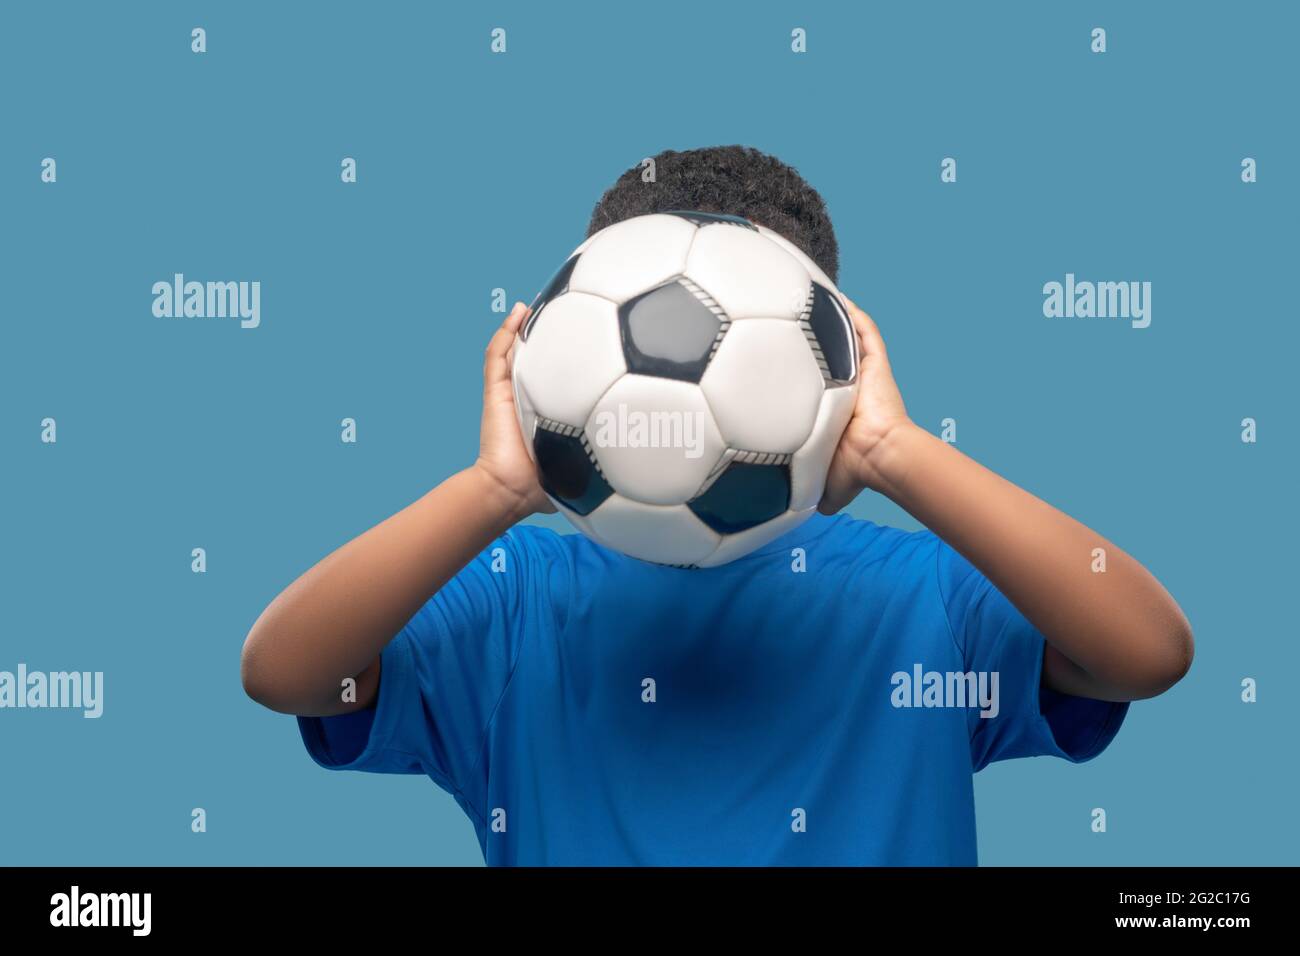 Boy holding soccer ball at face level Stock Photo